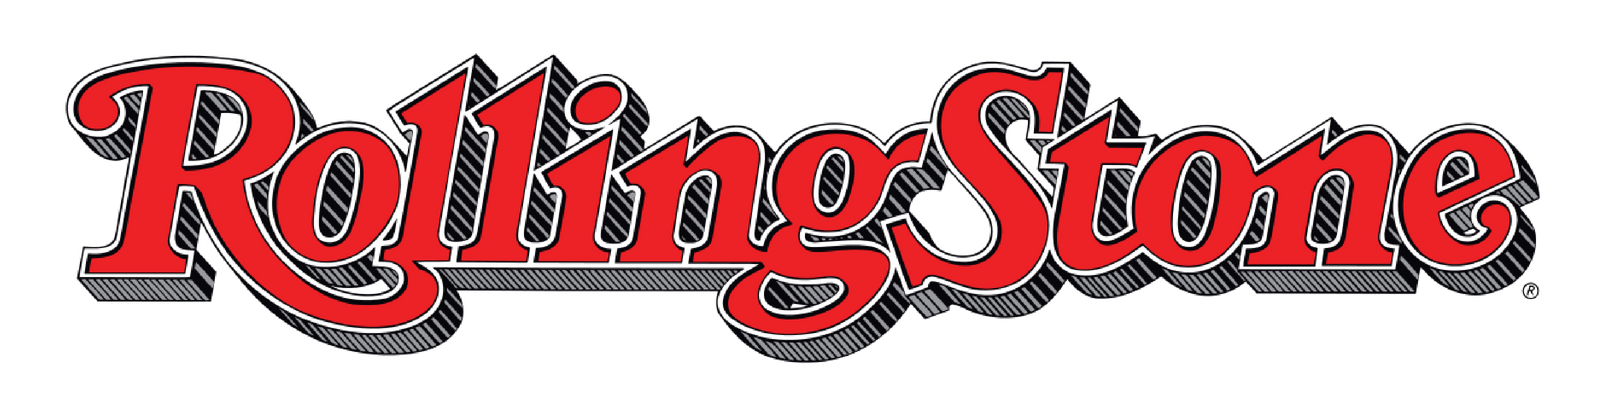 rolling stone logo (1) - Hound Labs